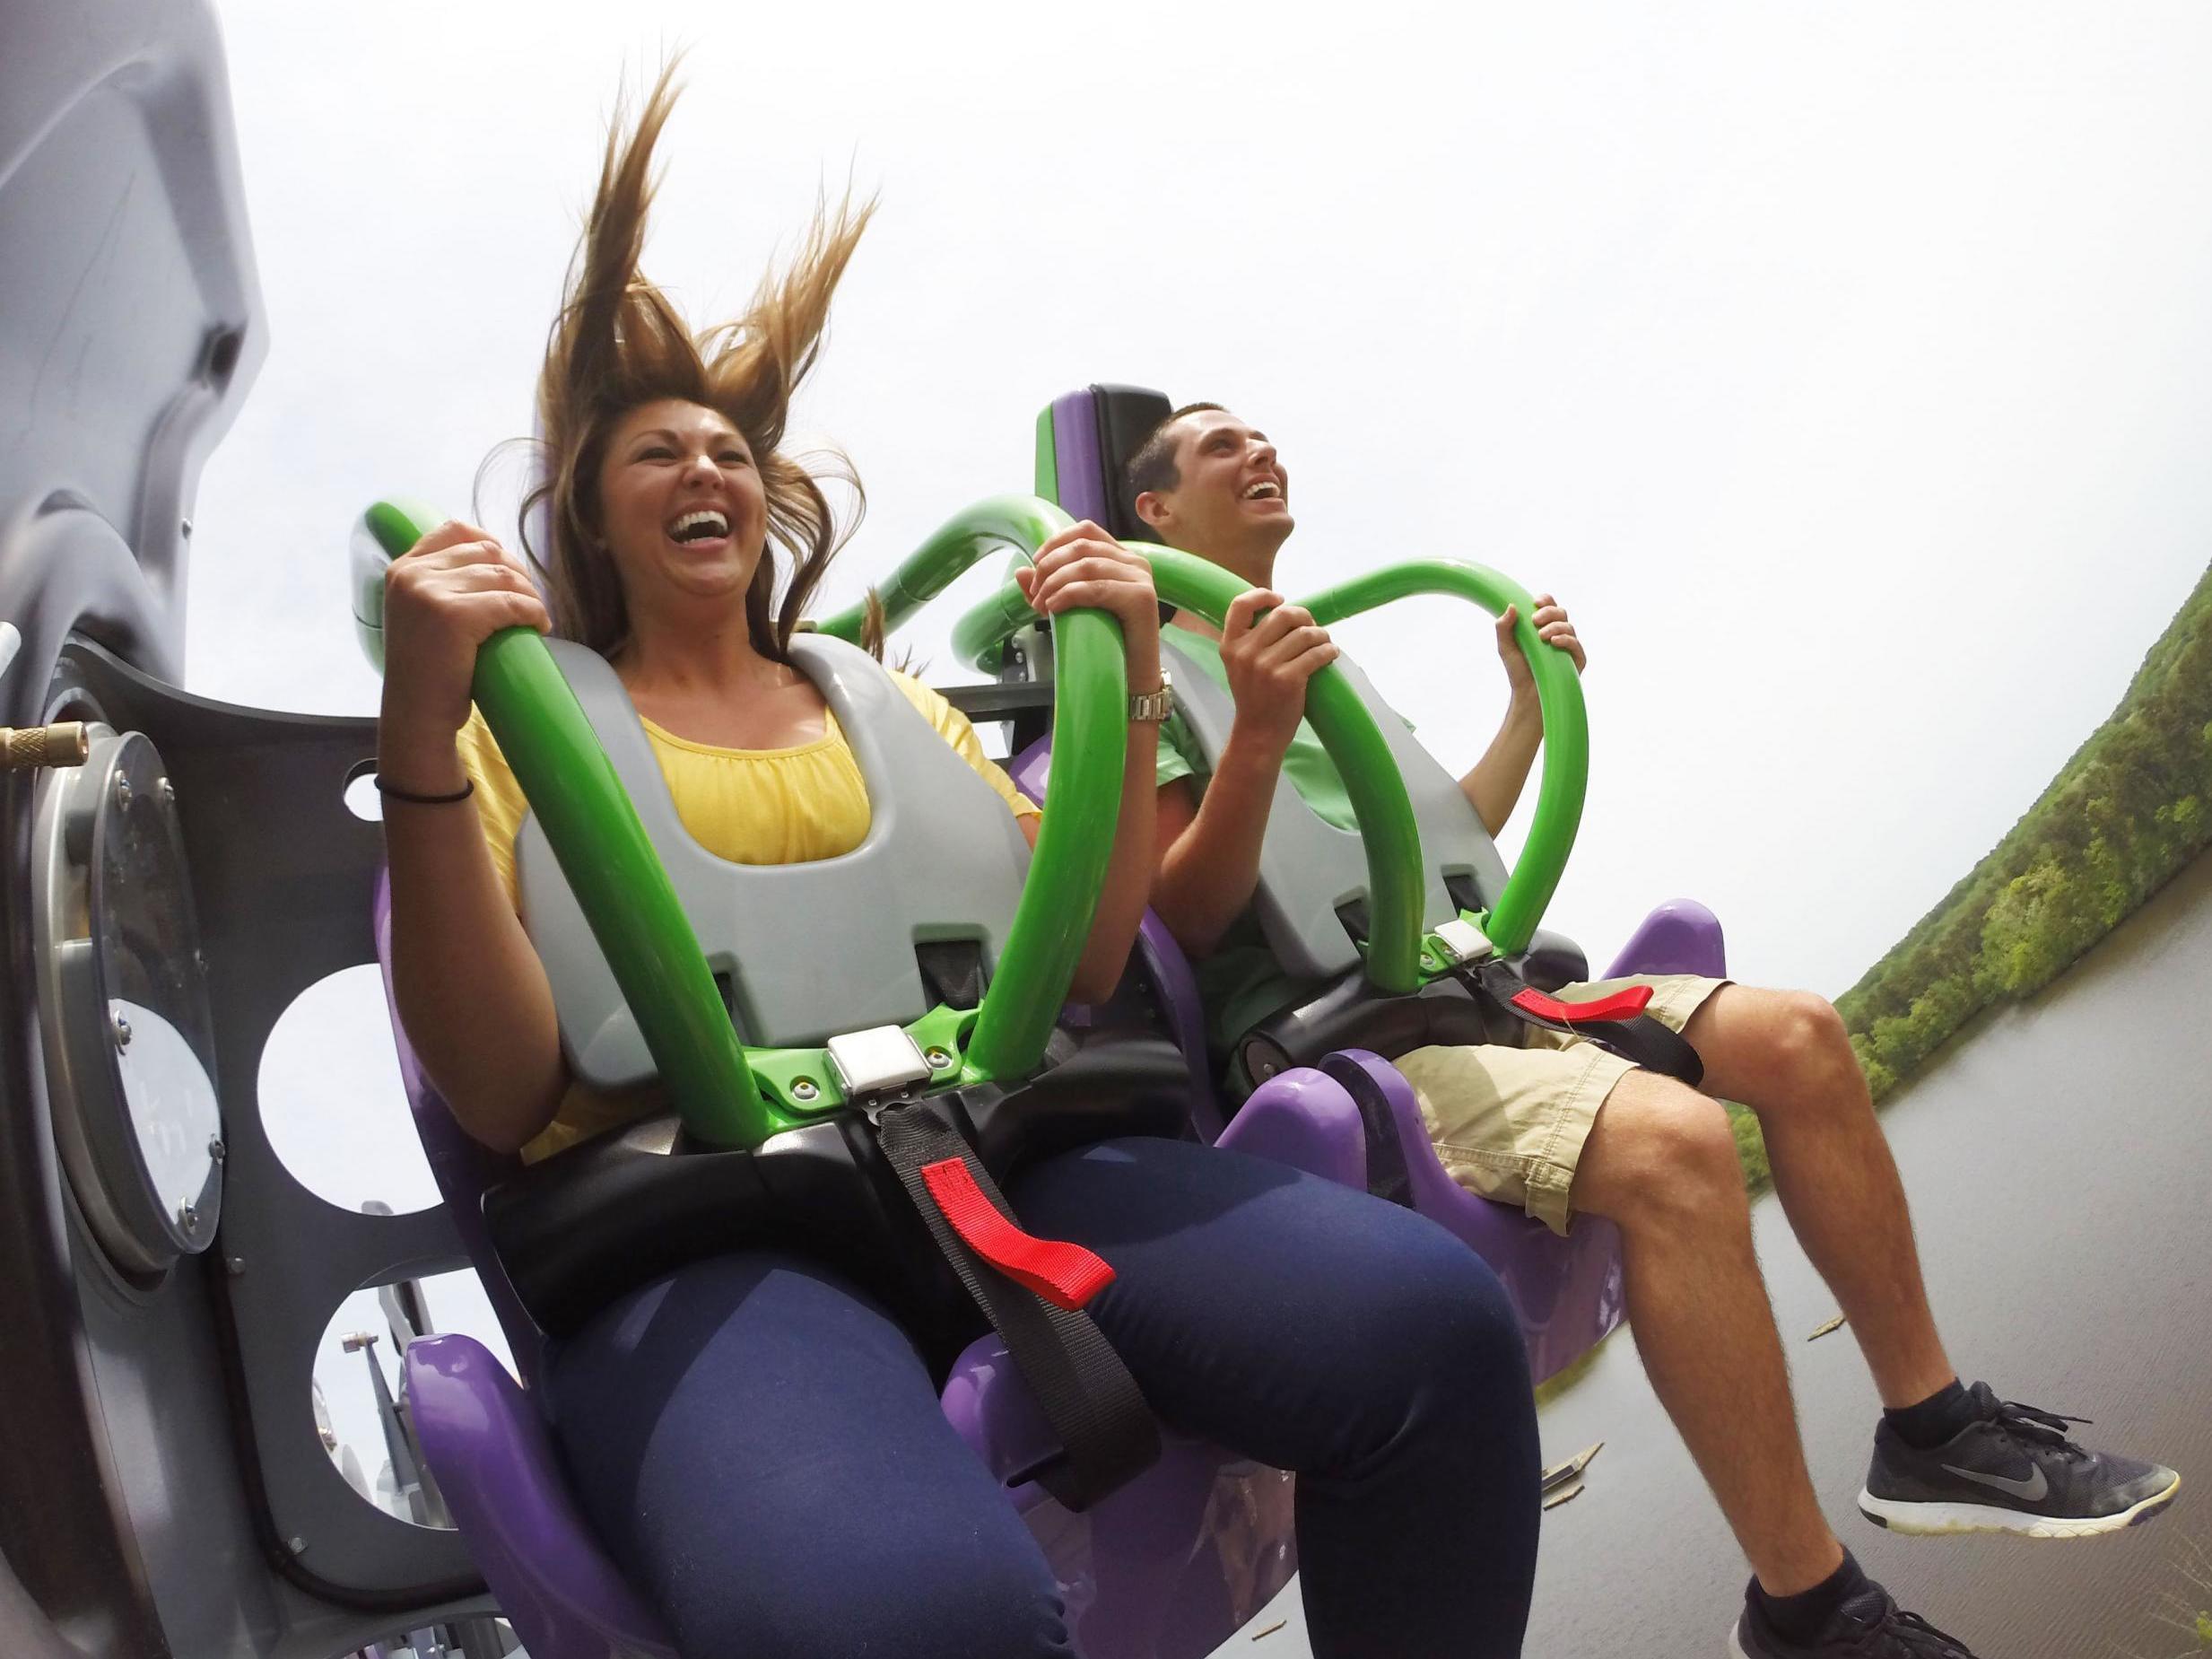 Six Flags' The Joker 4D ride will spin you around during the rollercoaster ride (Tess Claussen/Six Flags)